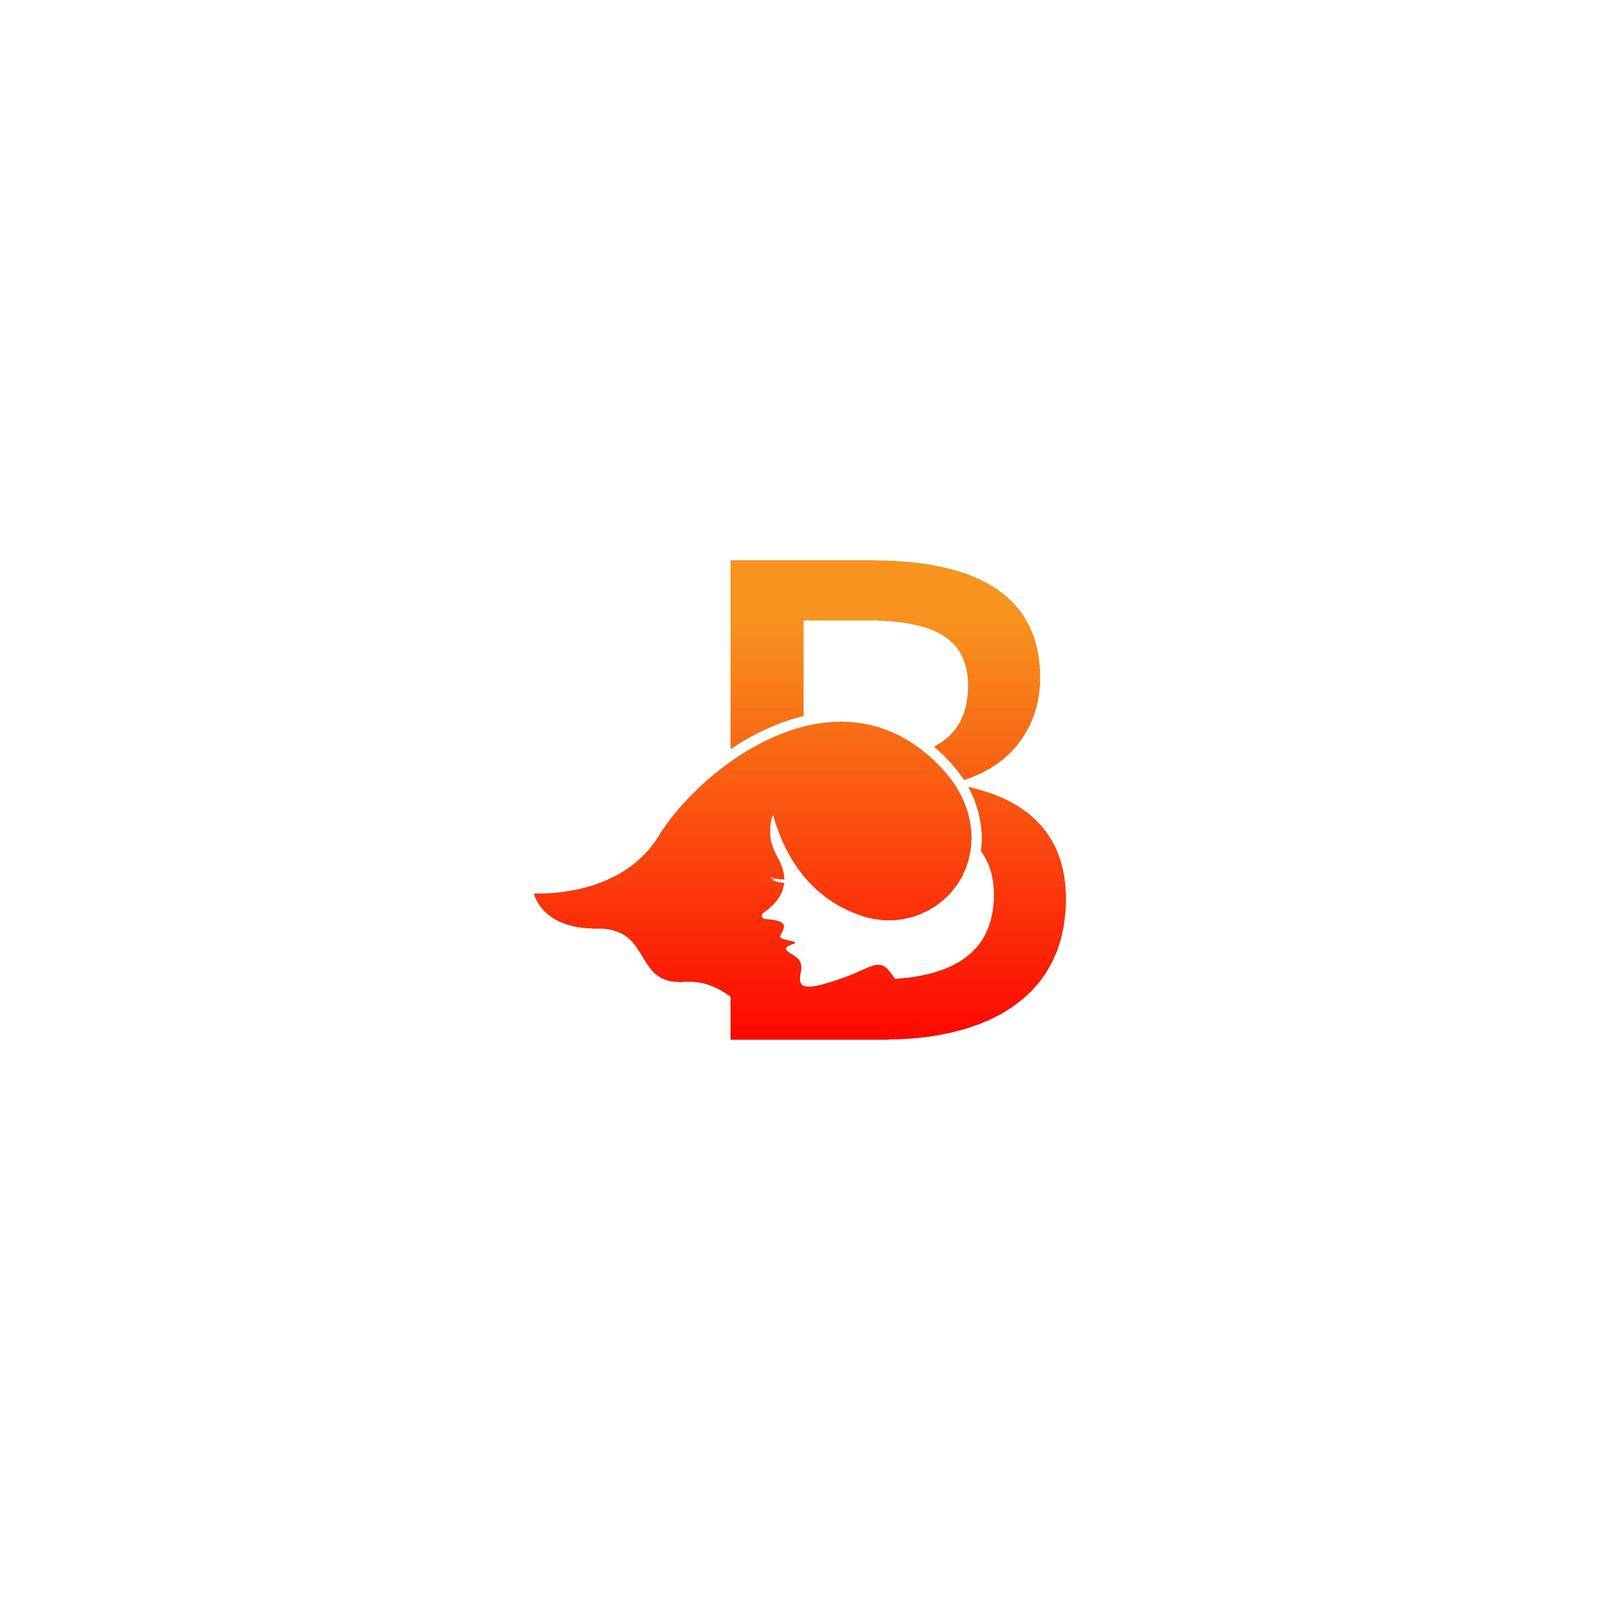 Letter B with woman face logo icon design vector by bellaxbudhong3